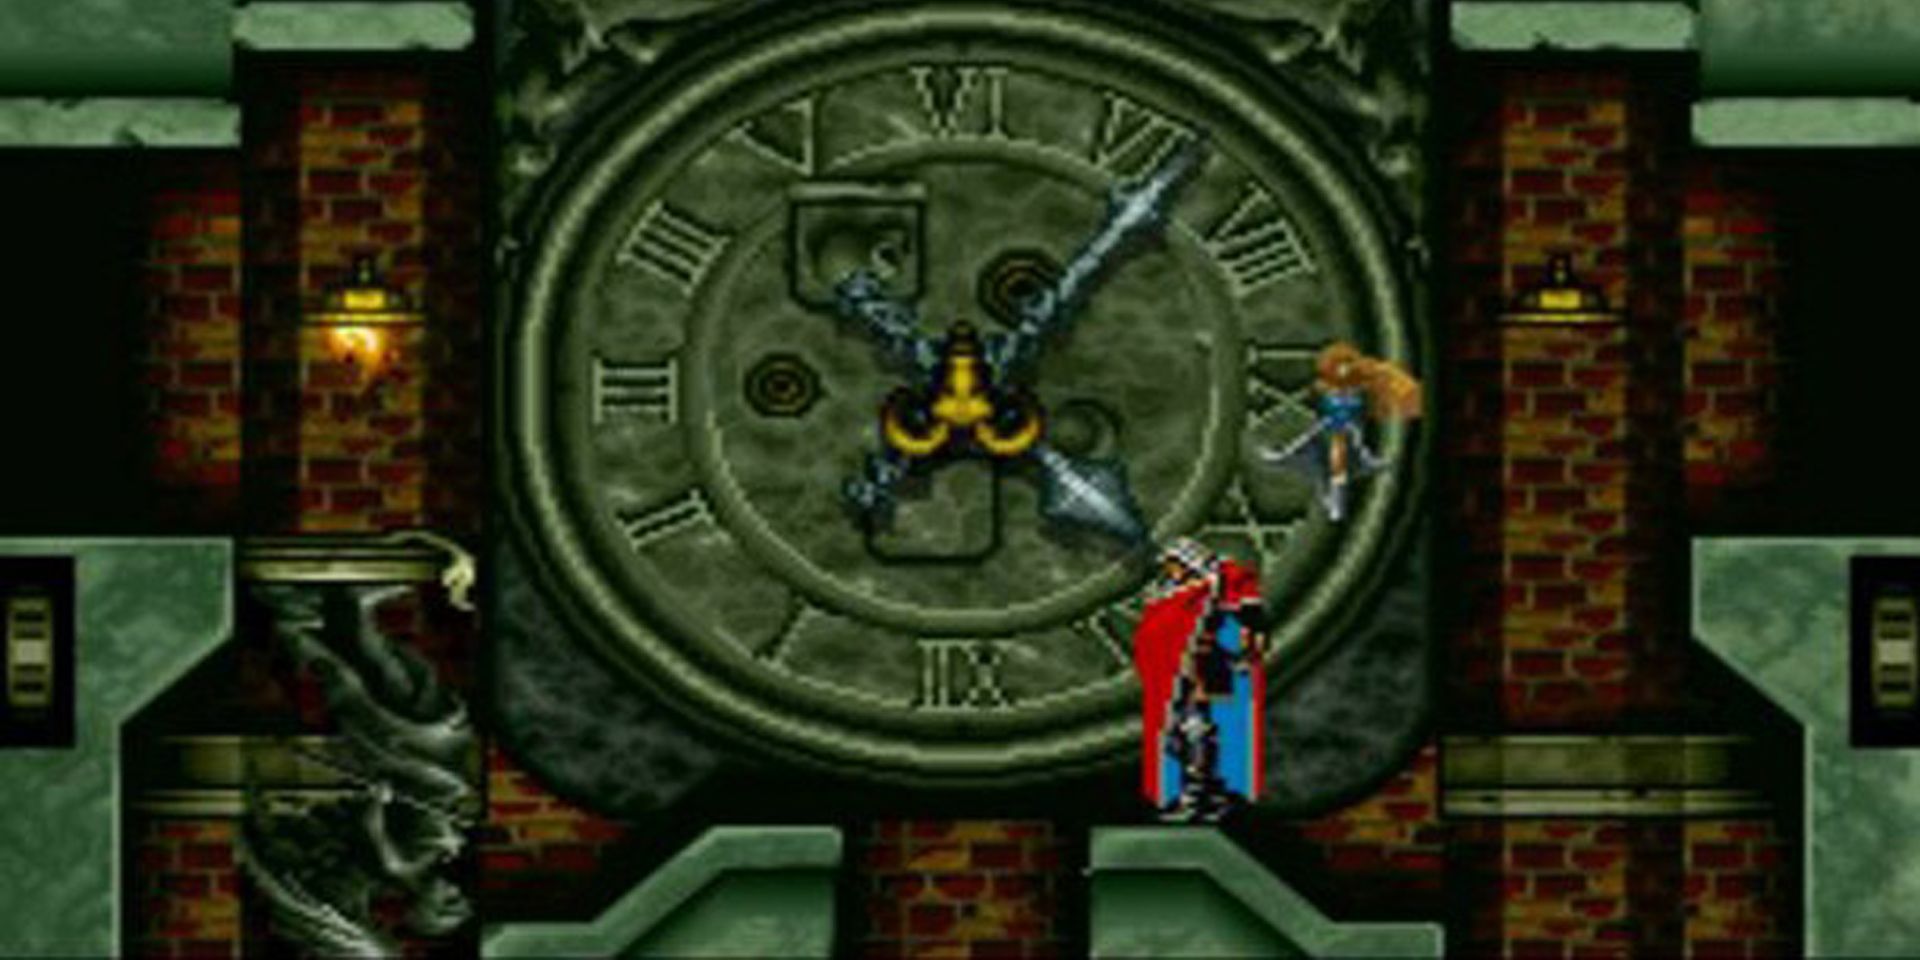 Alucard and his fairy familiar stand in front of the clock in the Inverted Castle in Castlevania: Symphony of the Night.